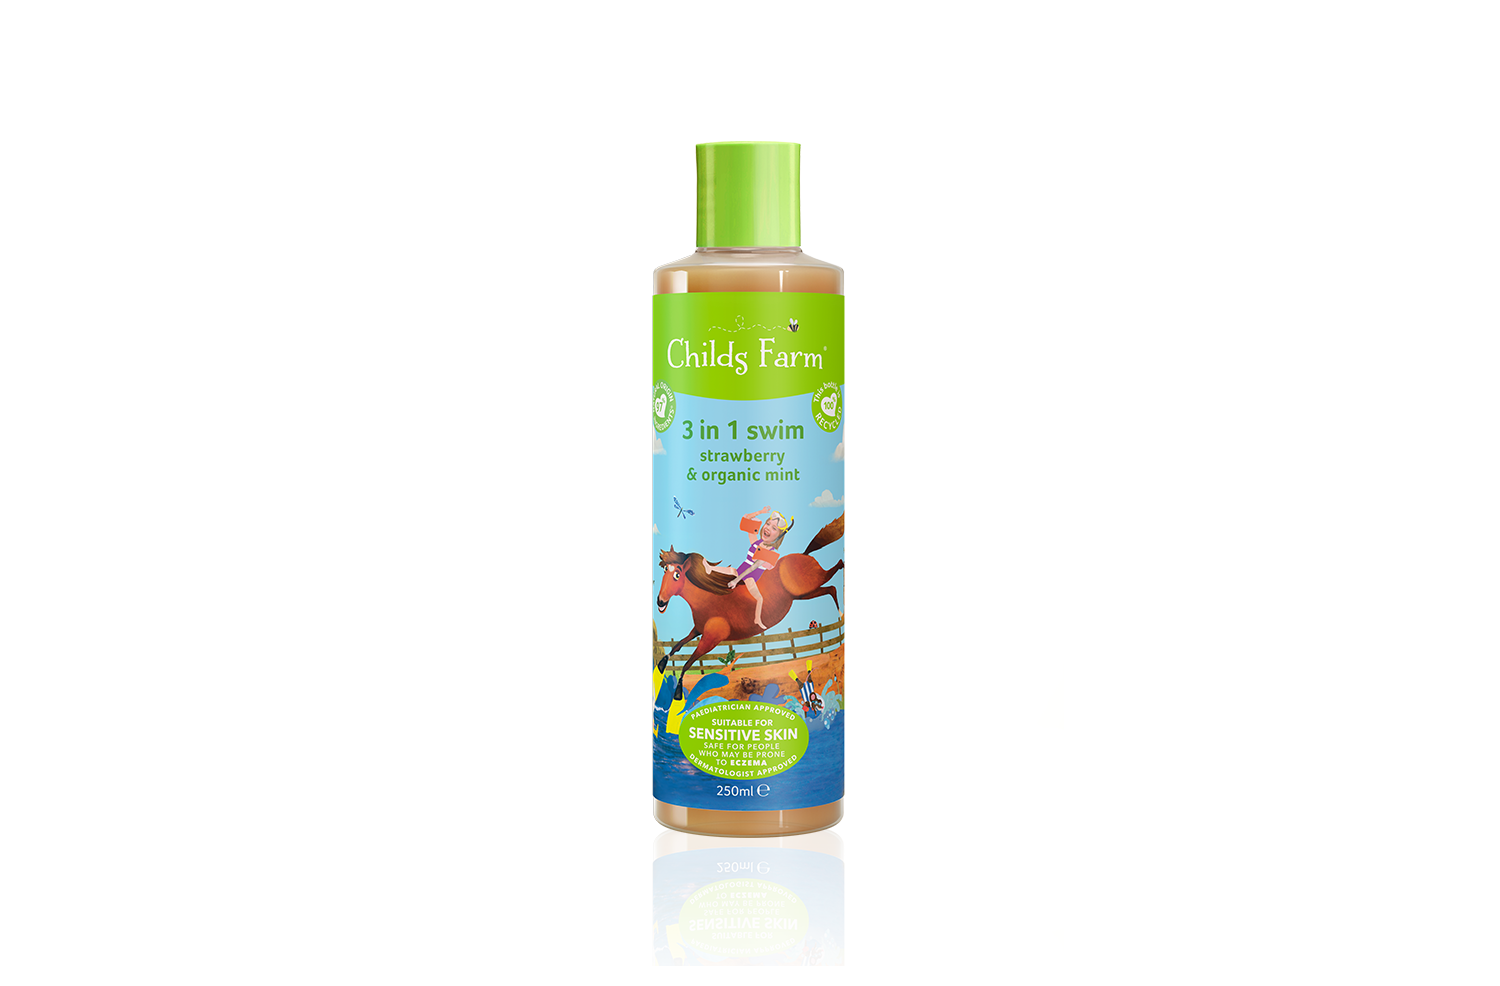 Hero image shows the product image of the Childs Farm 3 in 1 swim strawberry & organic mint 250ml with the label clearly facing forwards